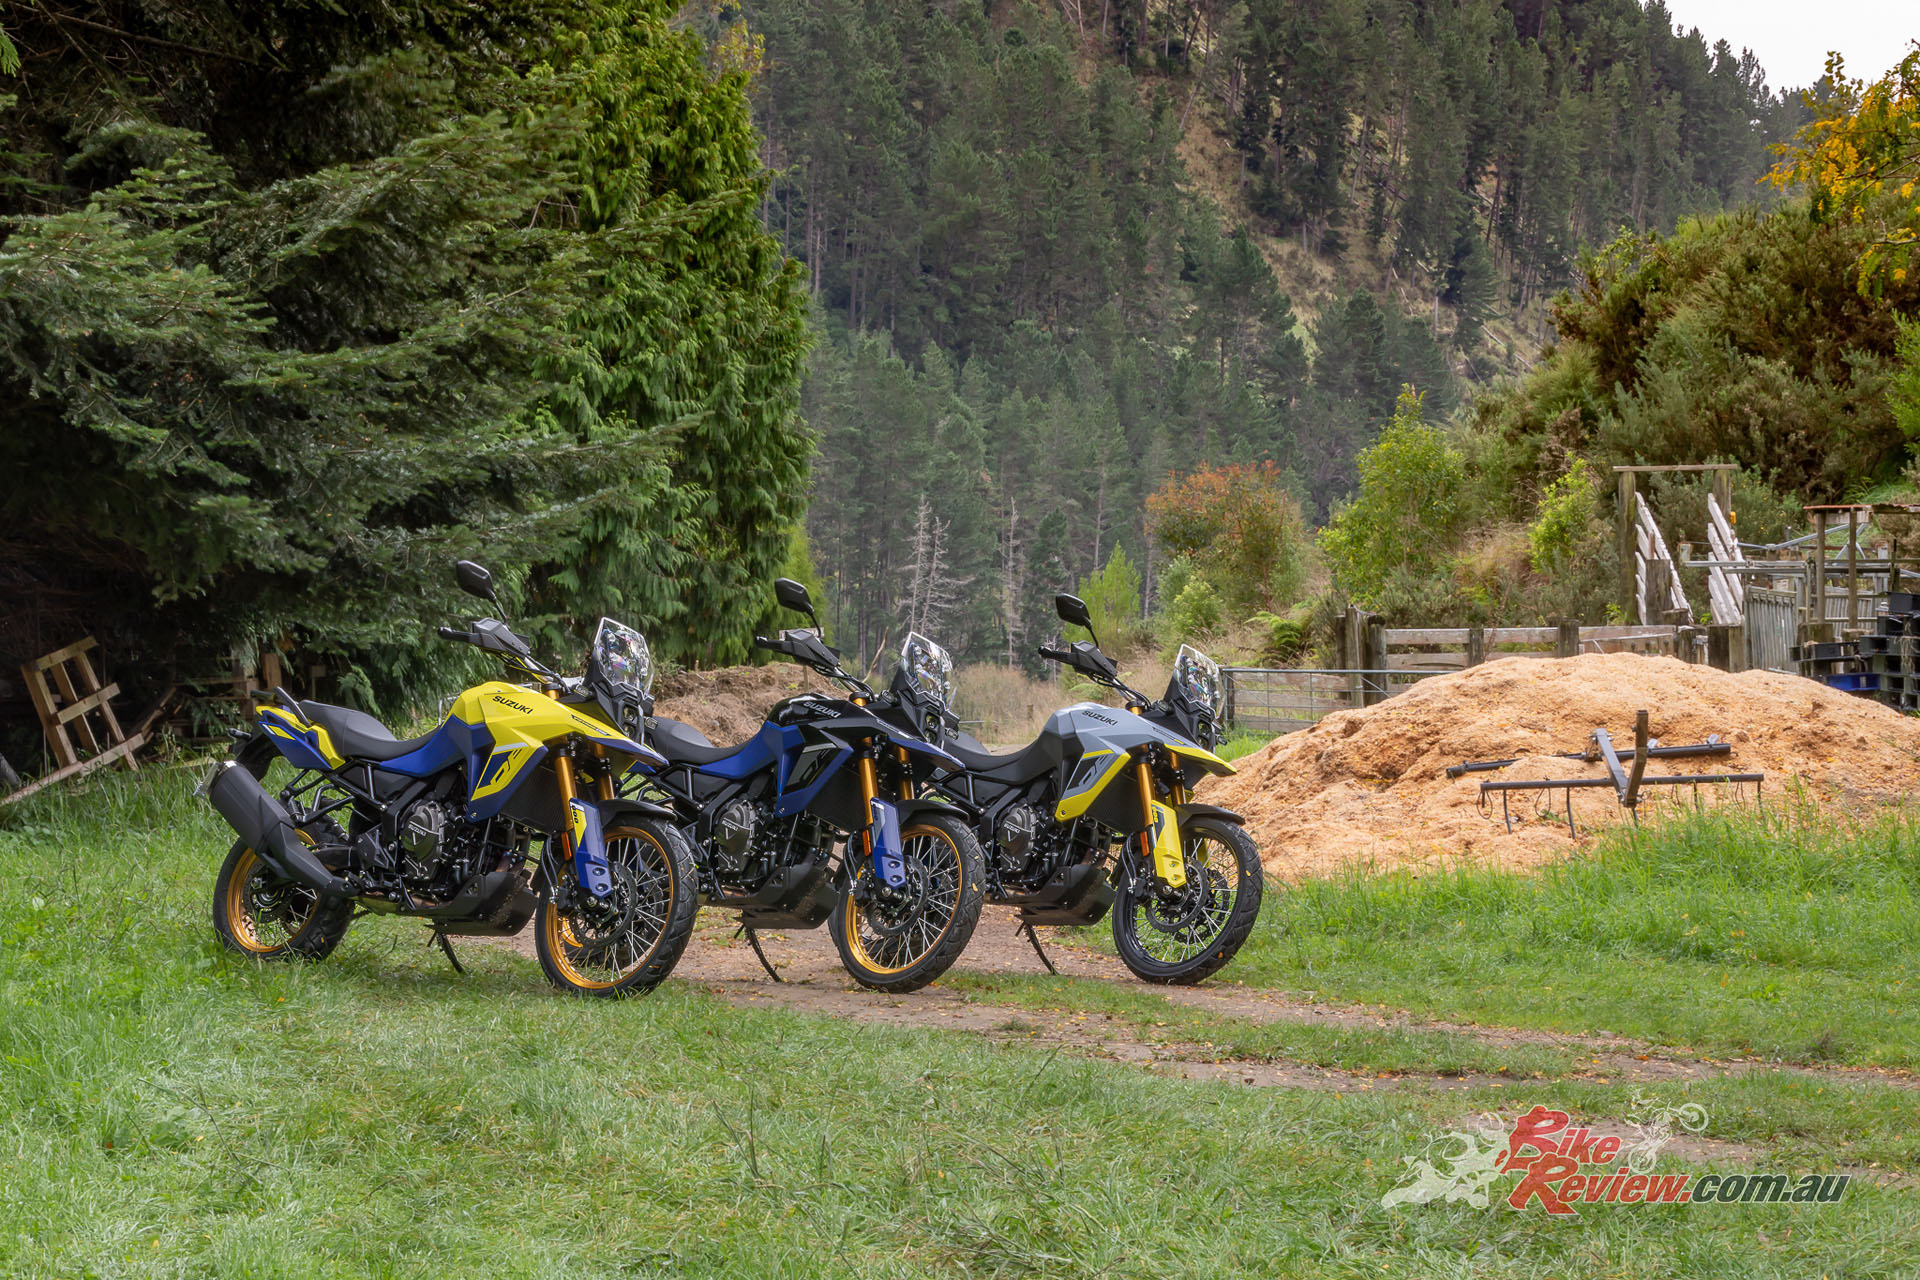 We jetted off to New Zealand to check out the all-new V-STROM 800DE from Suzuki!